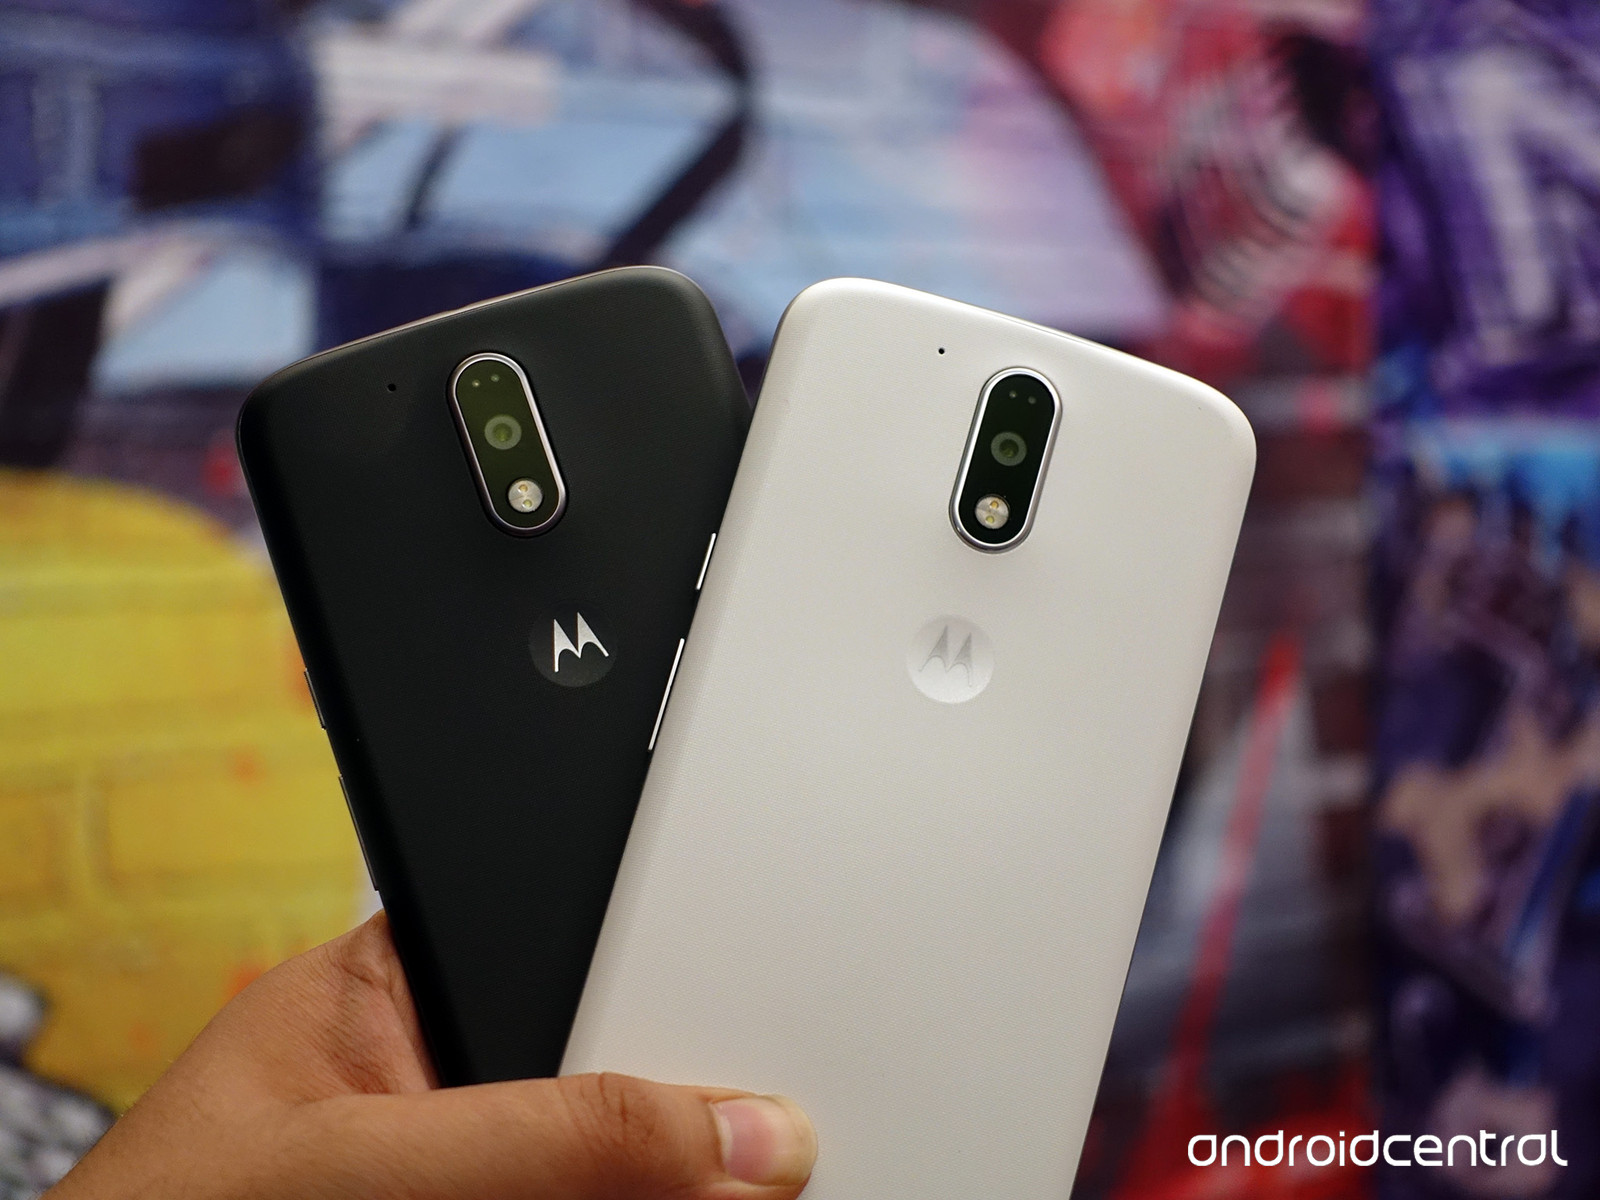 Moto G4 And G4 Plus What's The Difference - Cases Moto G 4 Plus , HD Wallpaper & Backgrounds